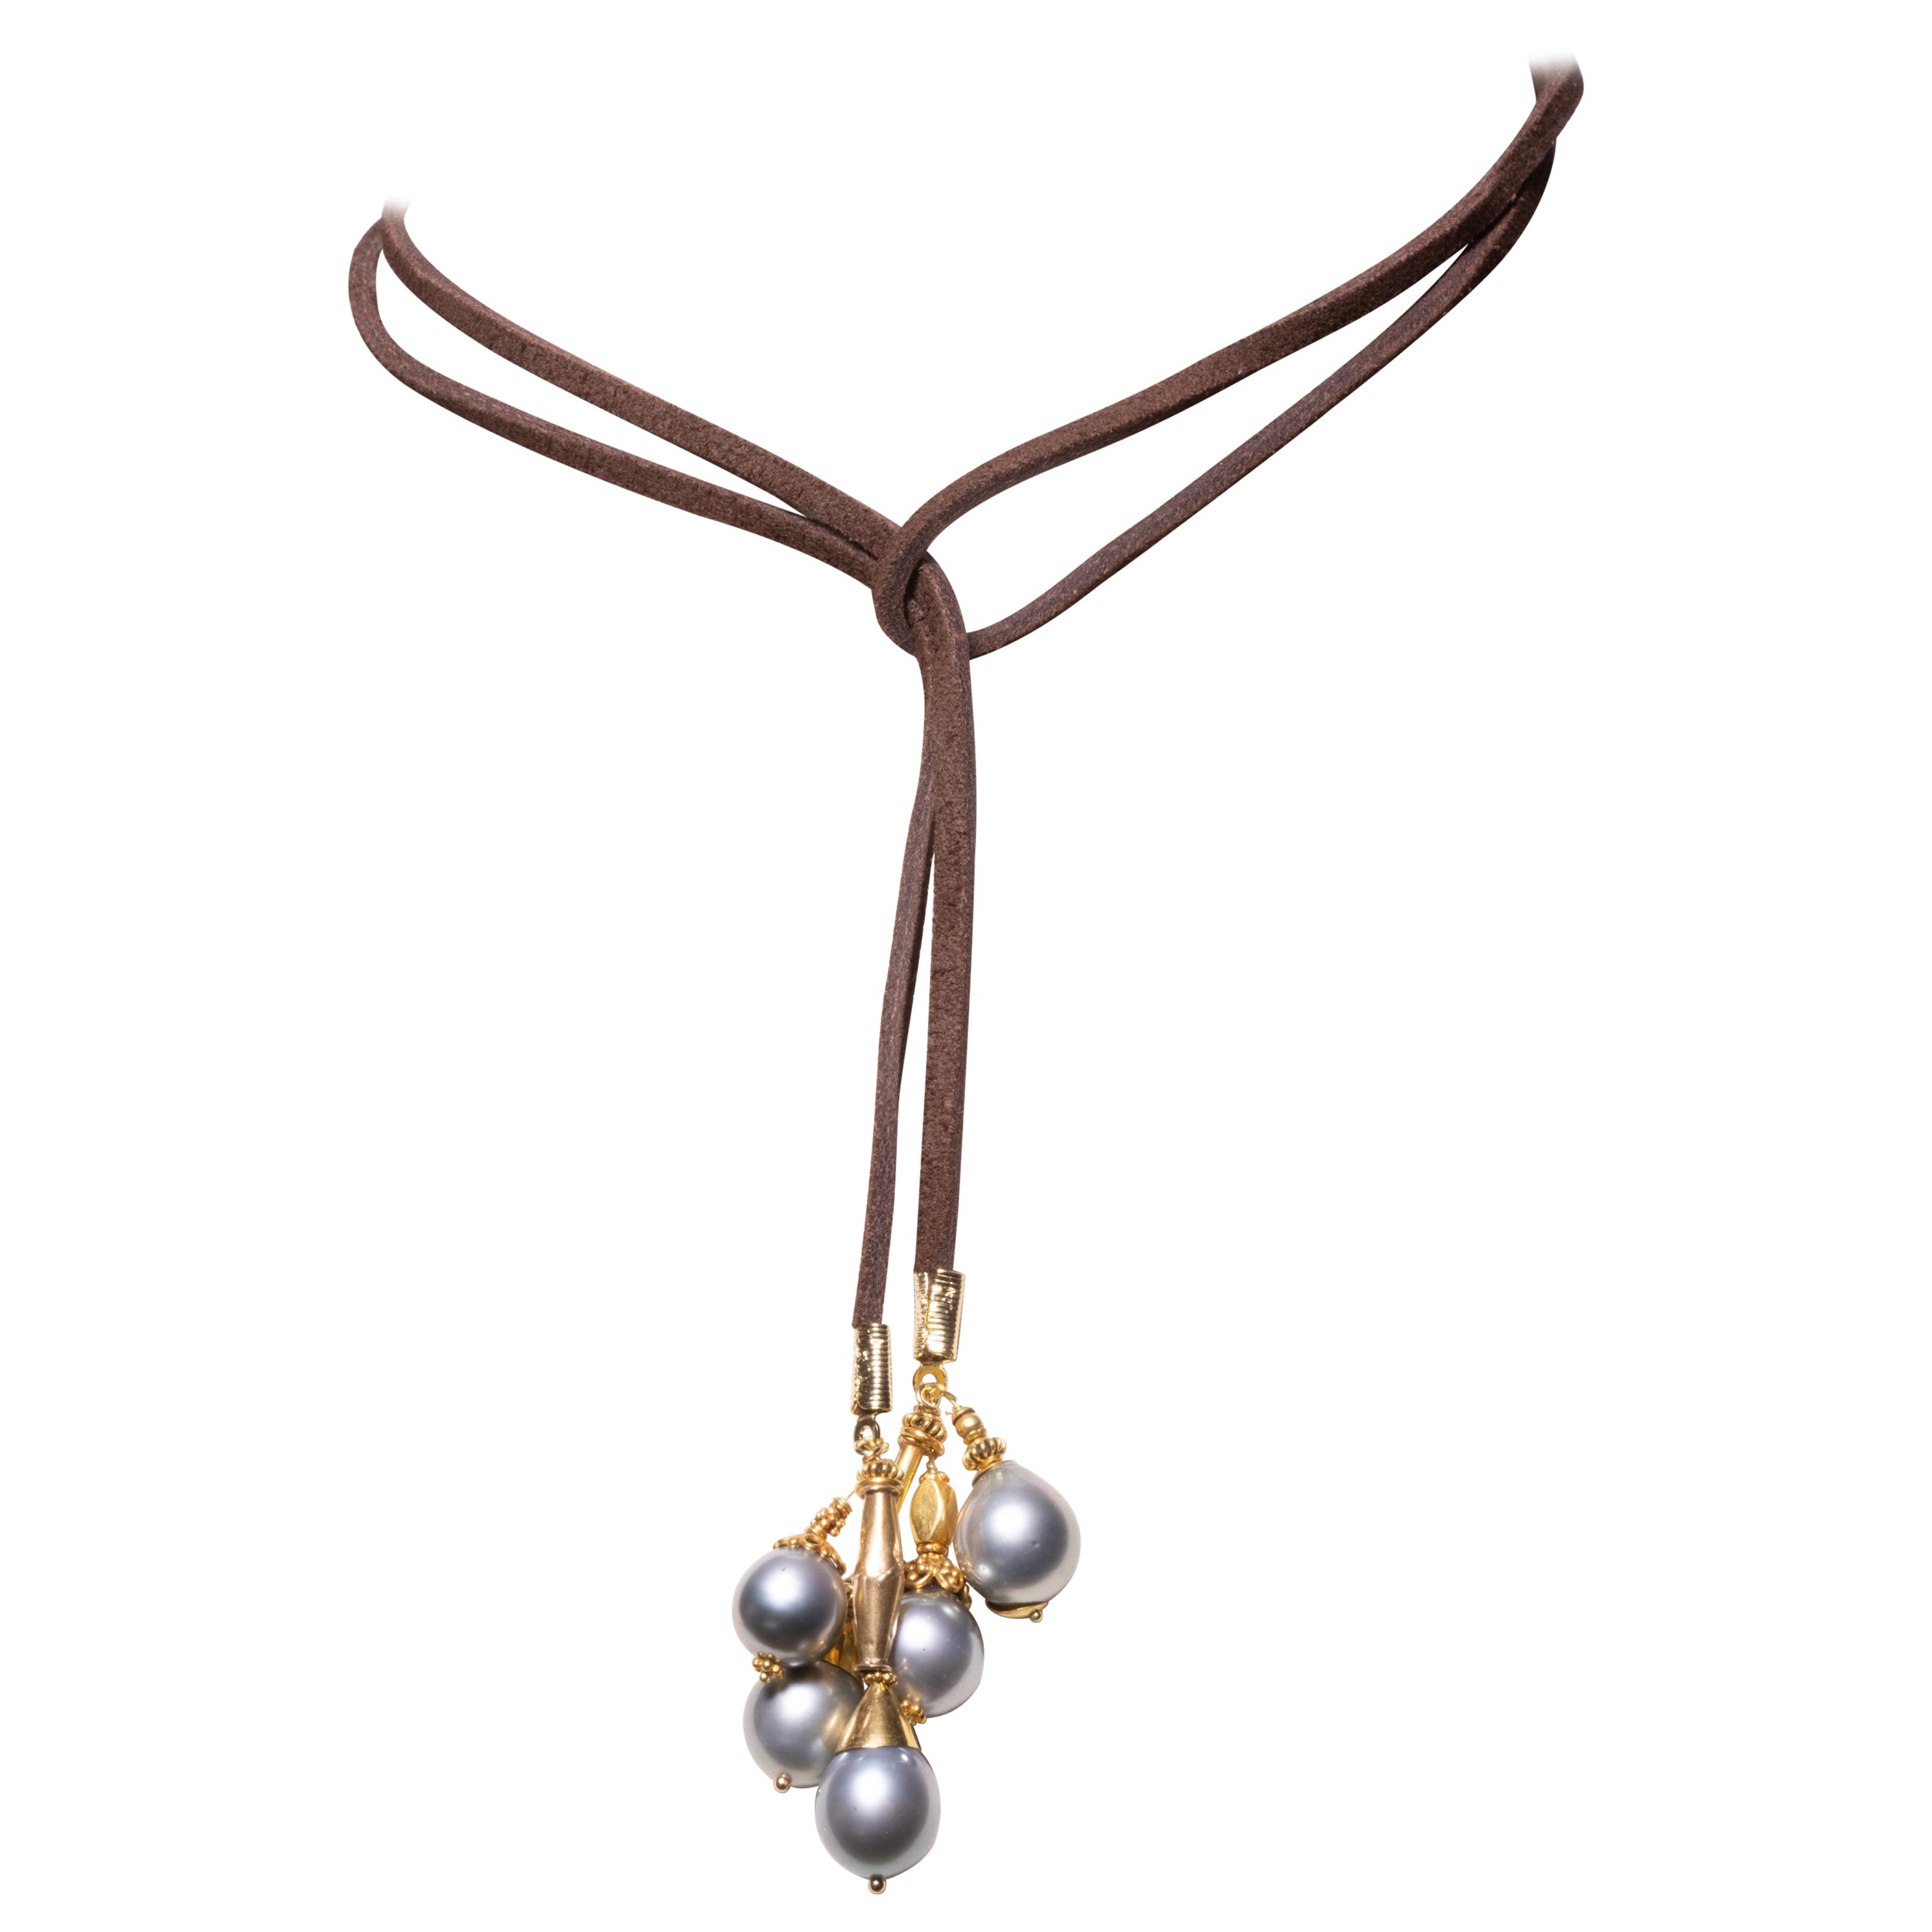 Tahitian Pearl & 18K Gold Lariat Necklace on Suede, by Deborah Lockhart Phillips